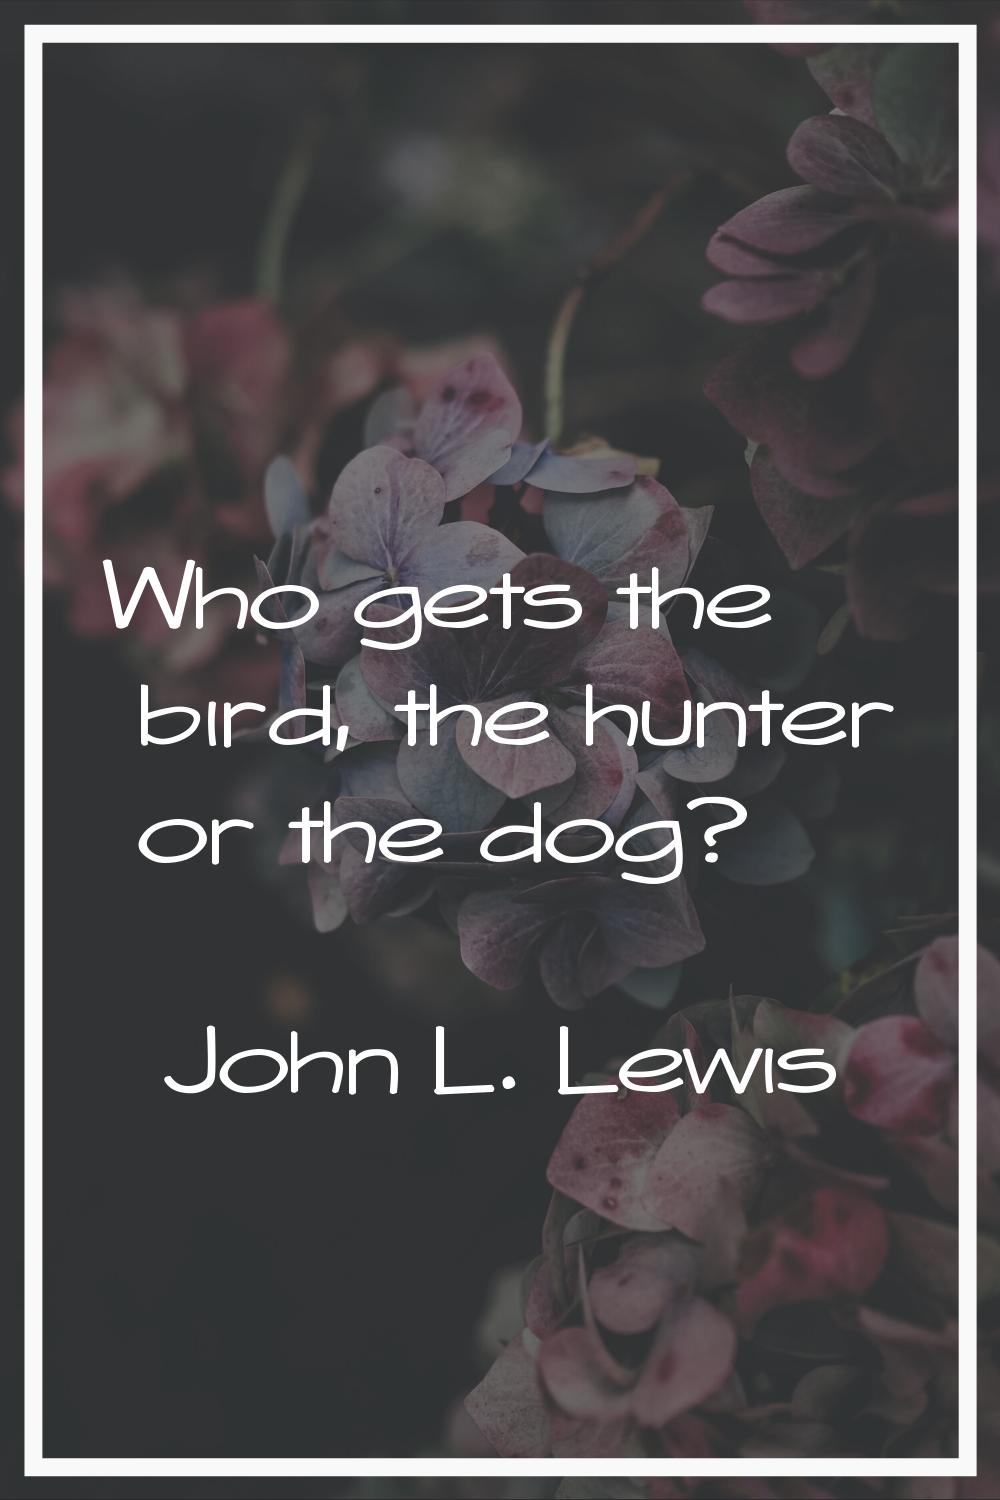 Who gets the bird, the hunter or the dog?